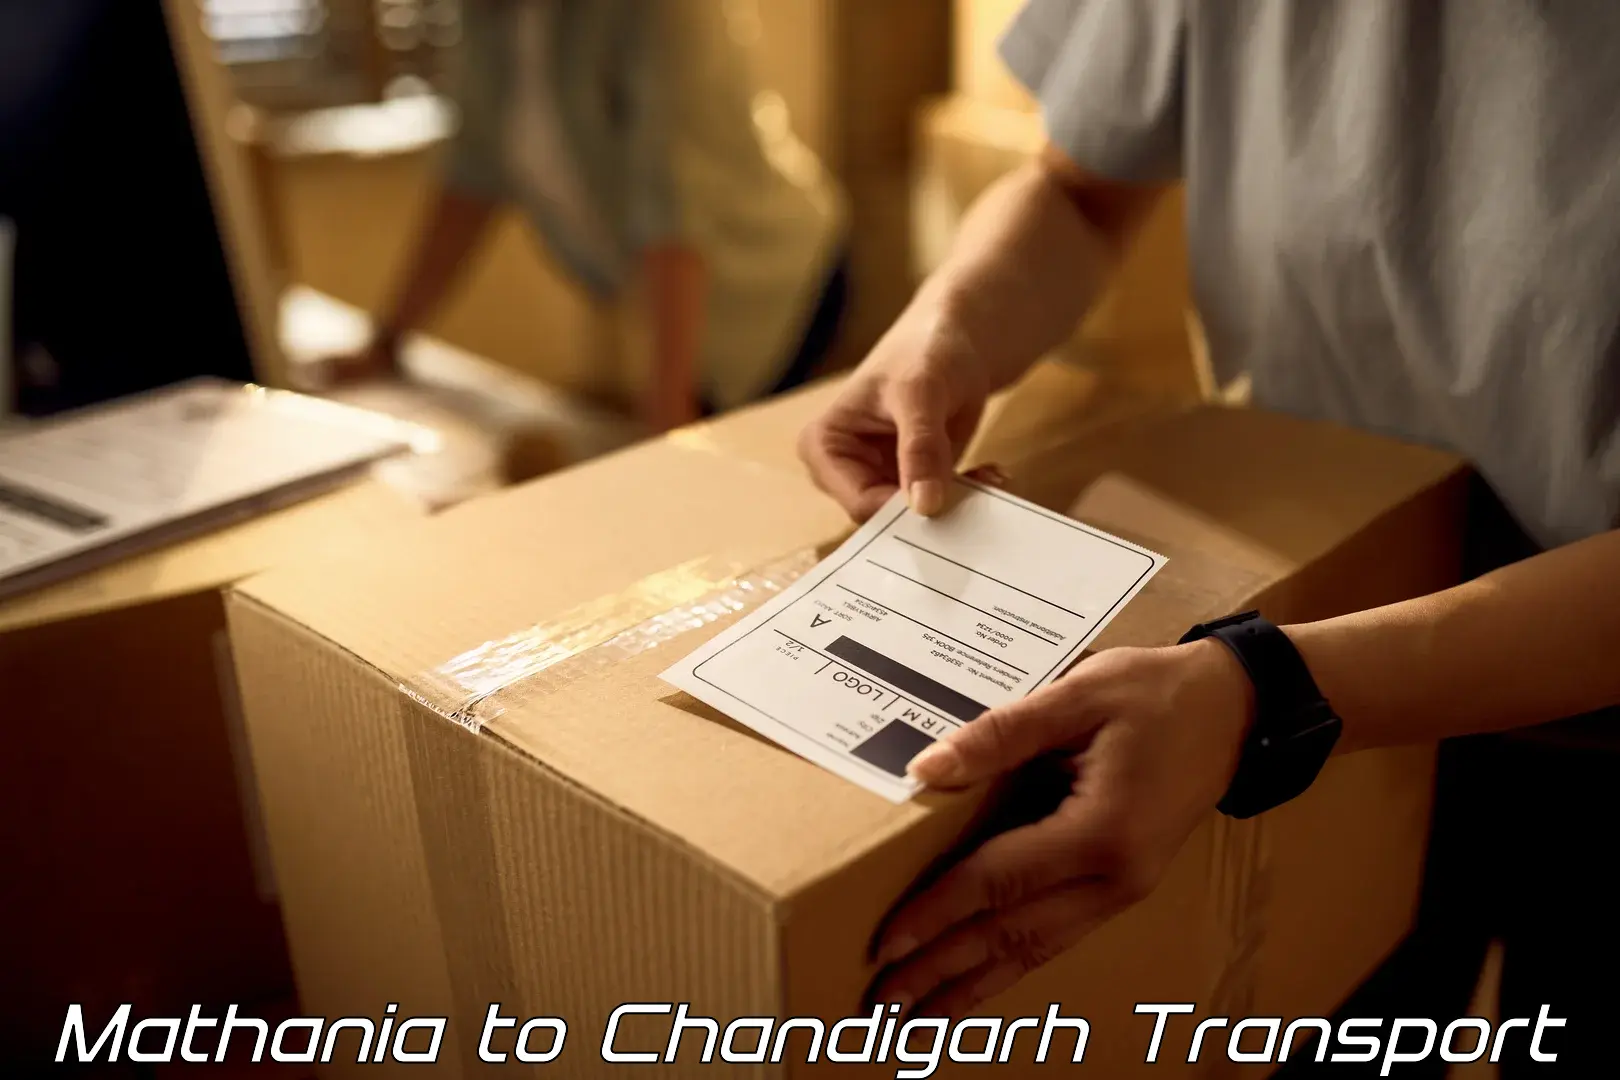 Express transport services Mathania to Chandigarh